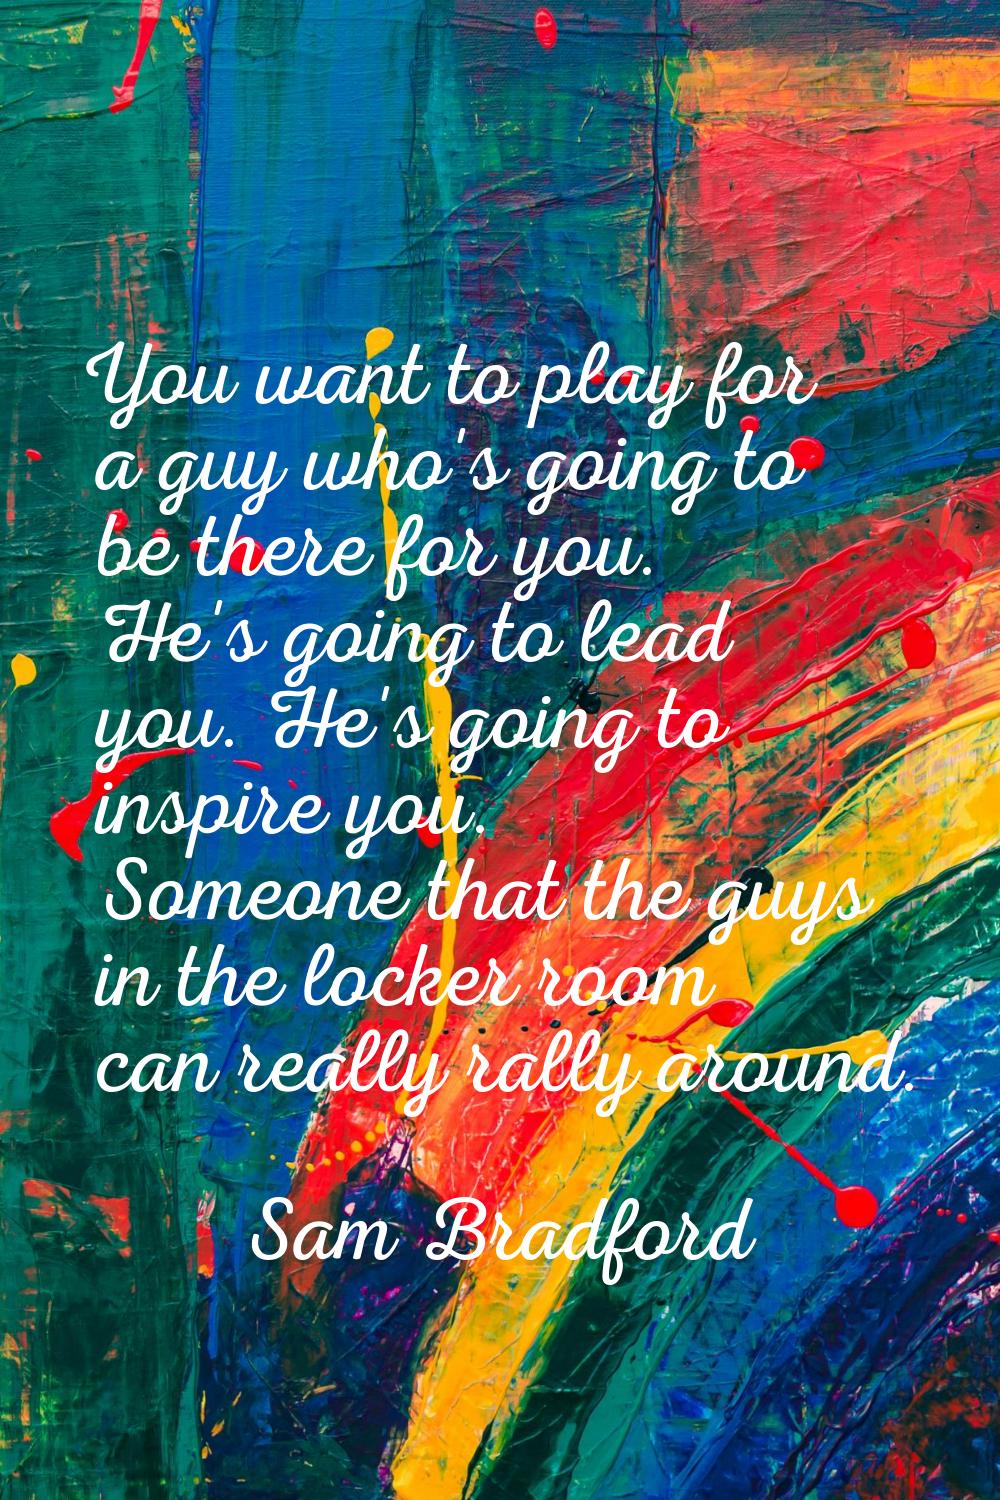 You want to play for a guy who's going to be there for you. He's going to lead you. He's going to i